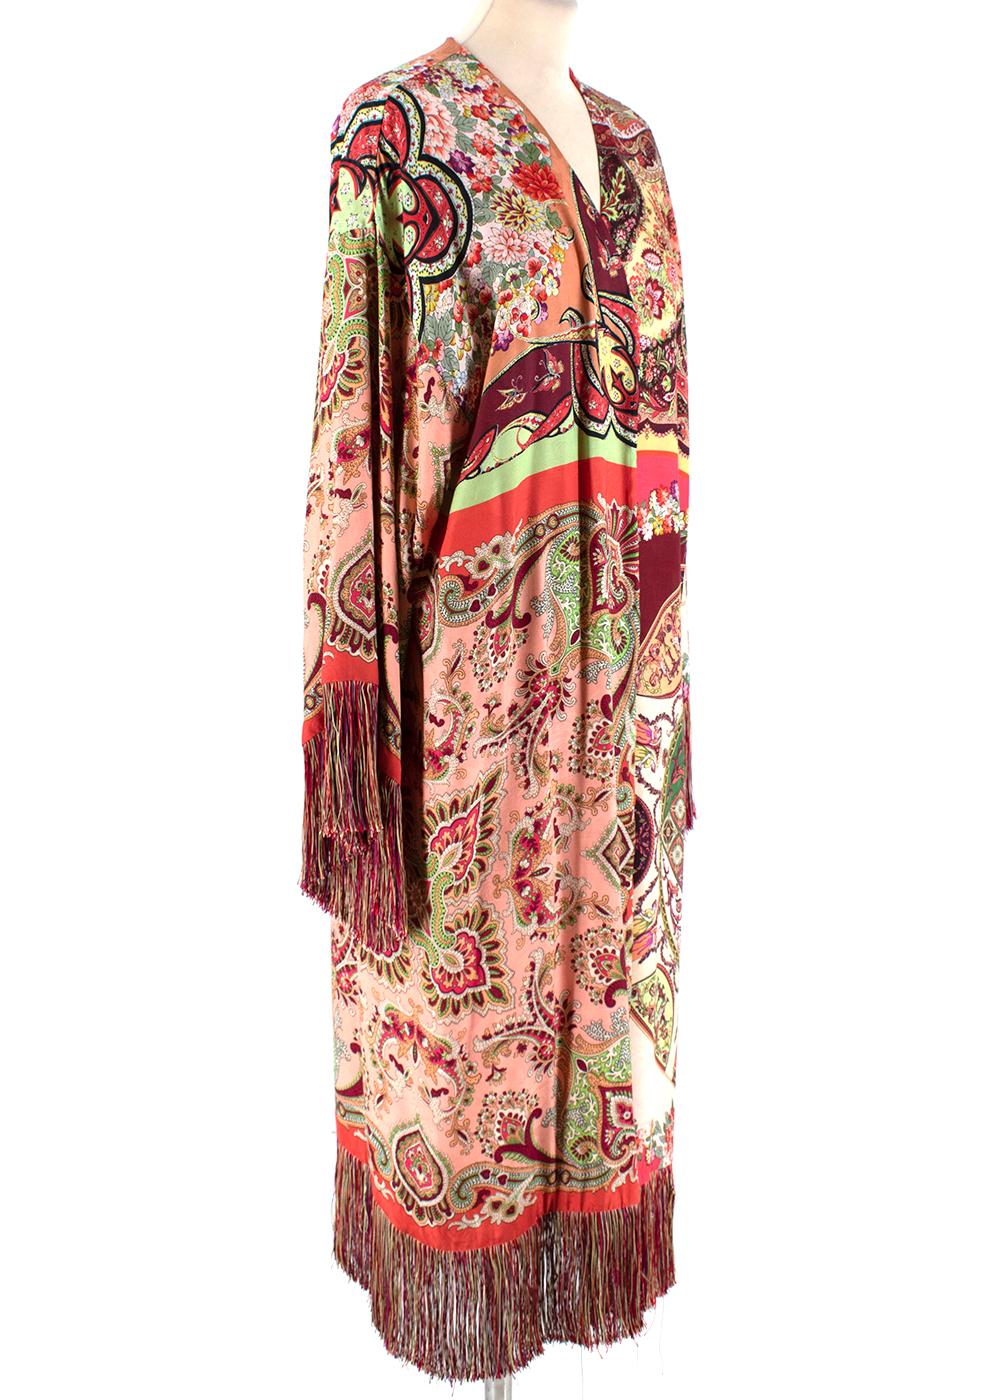 Etro Long Multi-Coloured Paisley Pattern Cardigan 

- Multi-coloured paisley print
- Wide sleeves
- Fringing on sleeves and bottom hem
- Silk lining
- Loose fit 

Materials:
Exterior
- 85% Viscose 
- 35% Silk.

Interior
- 100% Silk.

Dry Clean